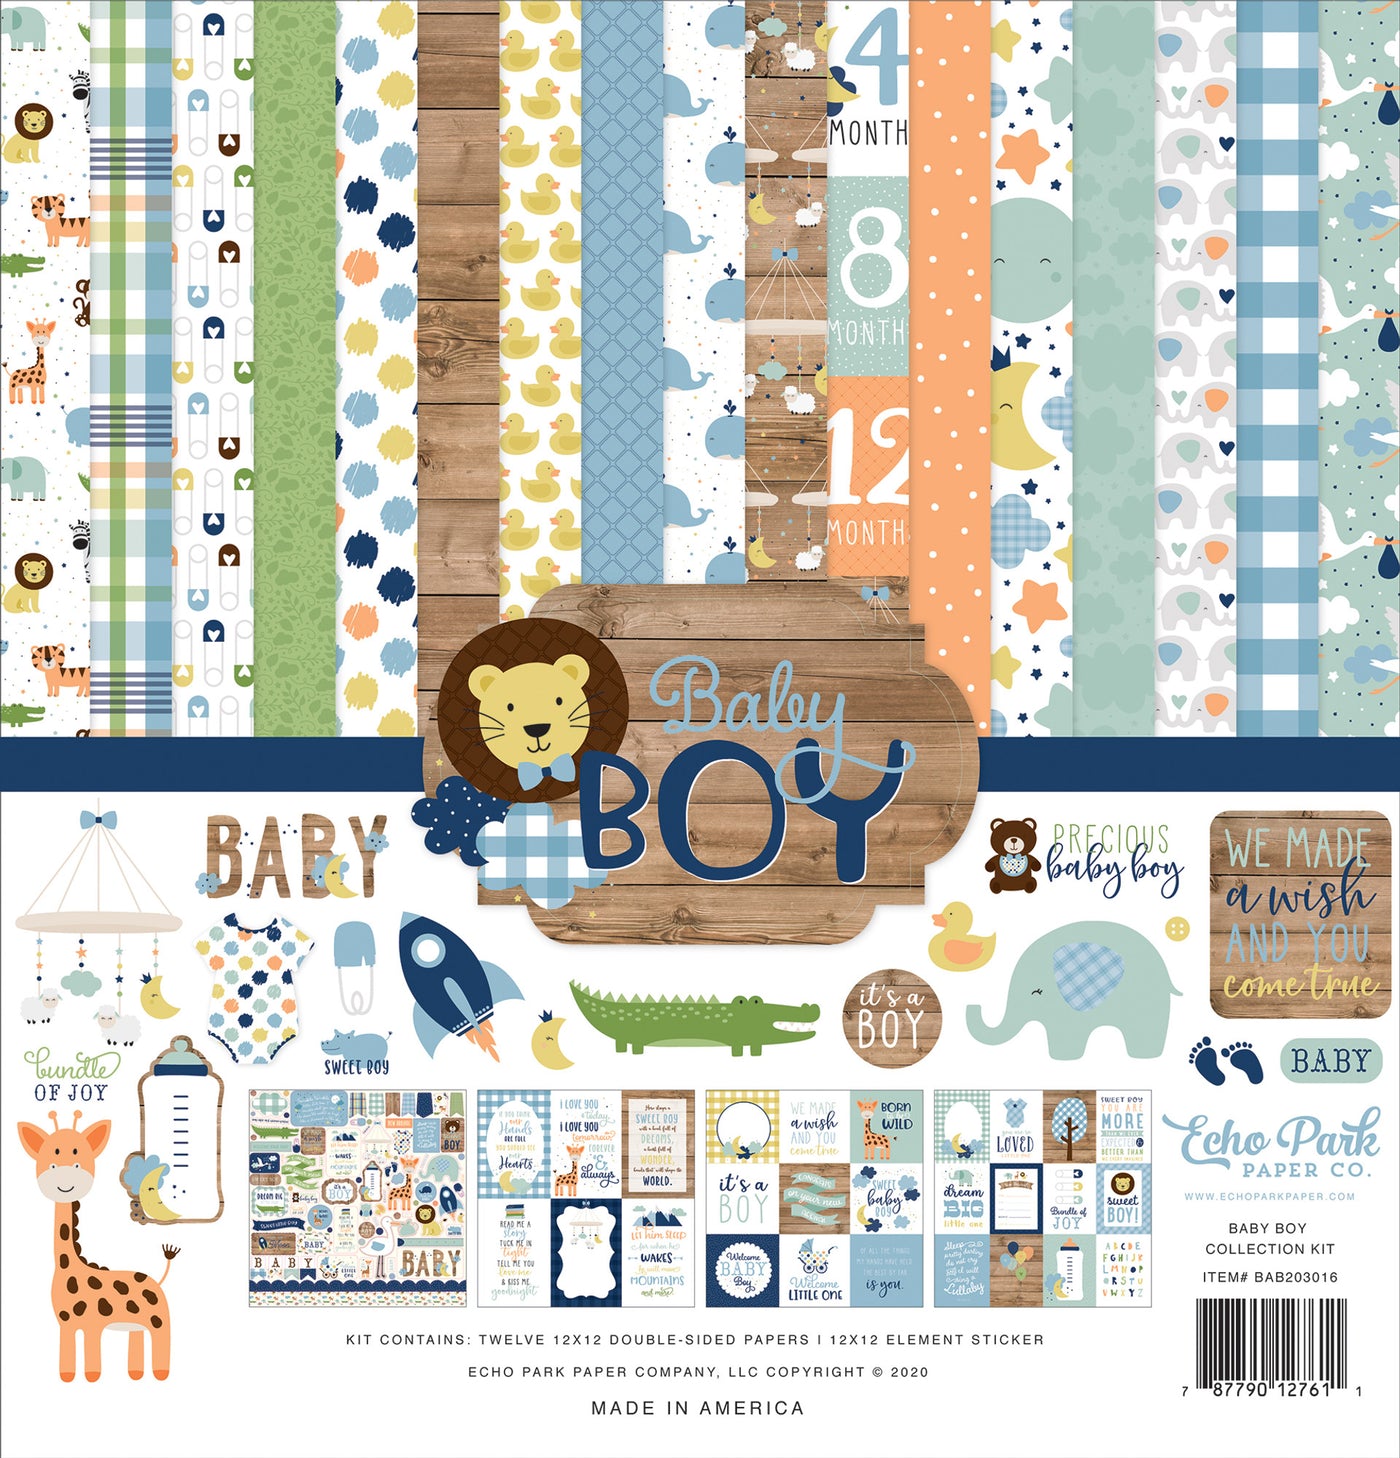 Twelve 12x12 double-sided designer sheets with creative patterns featuring plaids, duckies, storks, and all the love for a new baby boy. Archival quality and acid-free.